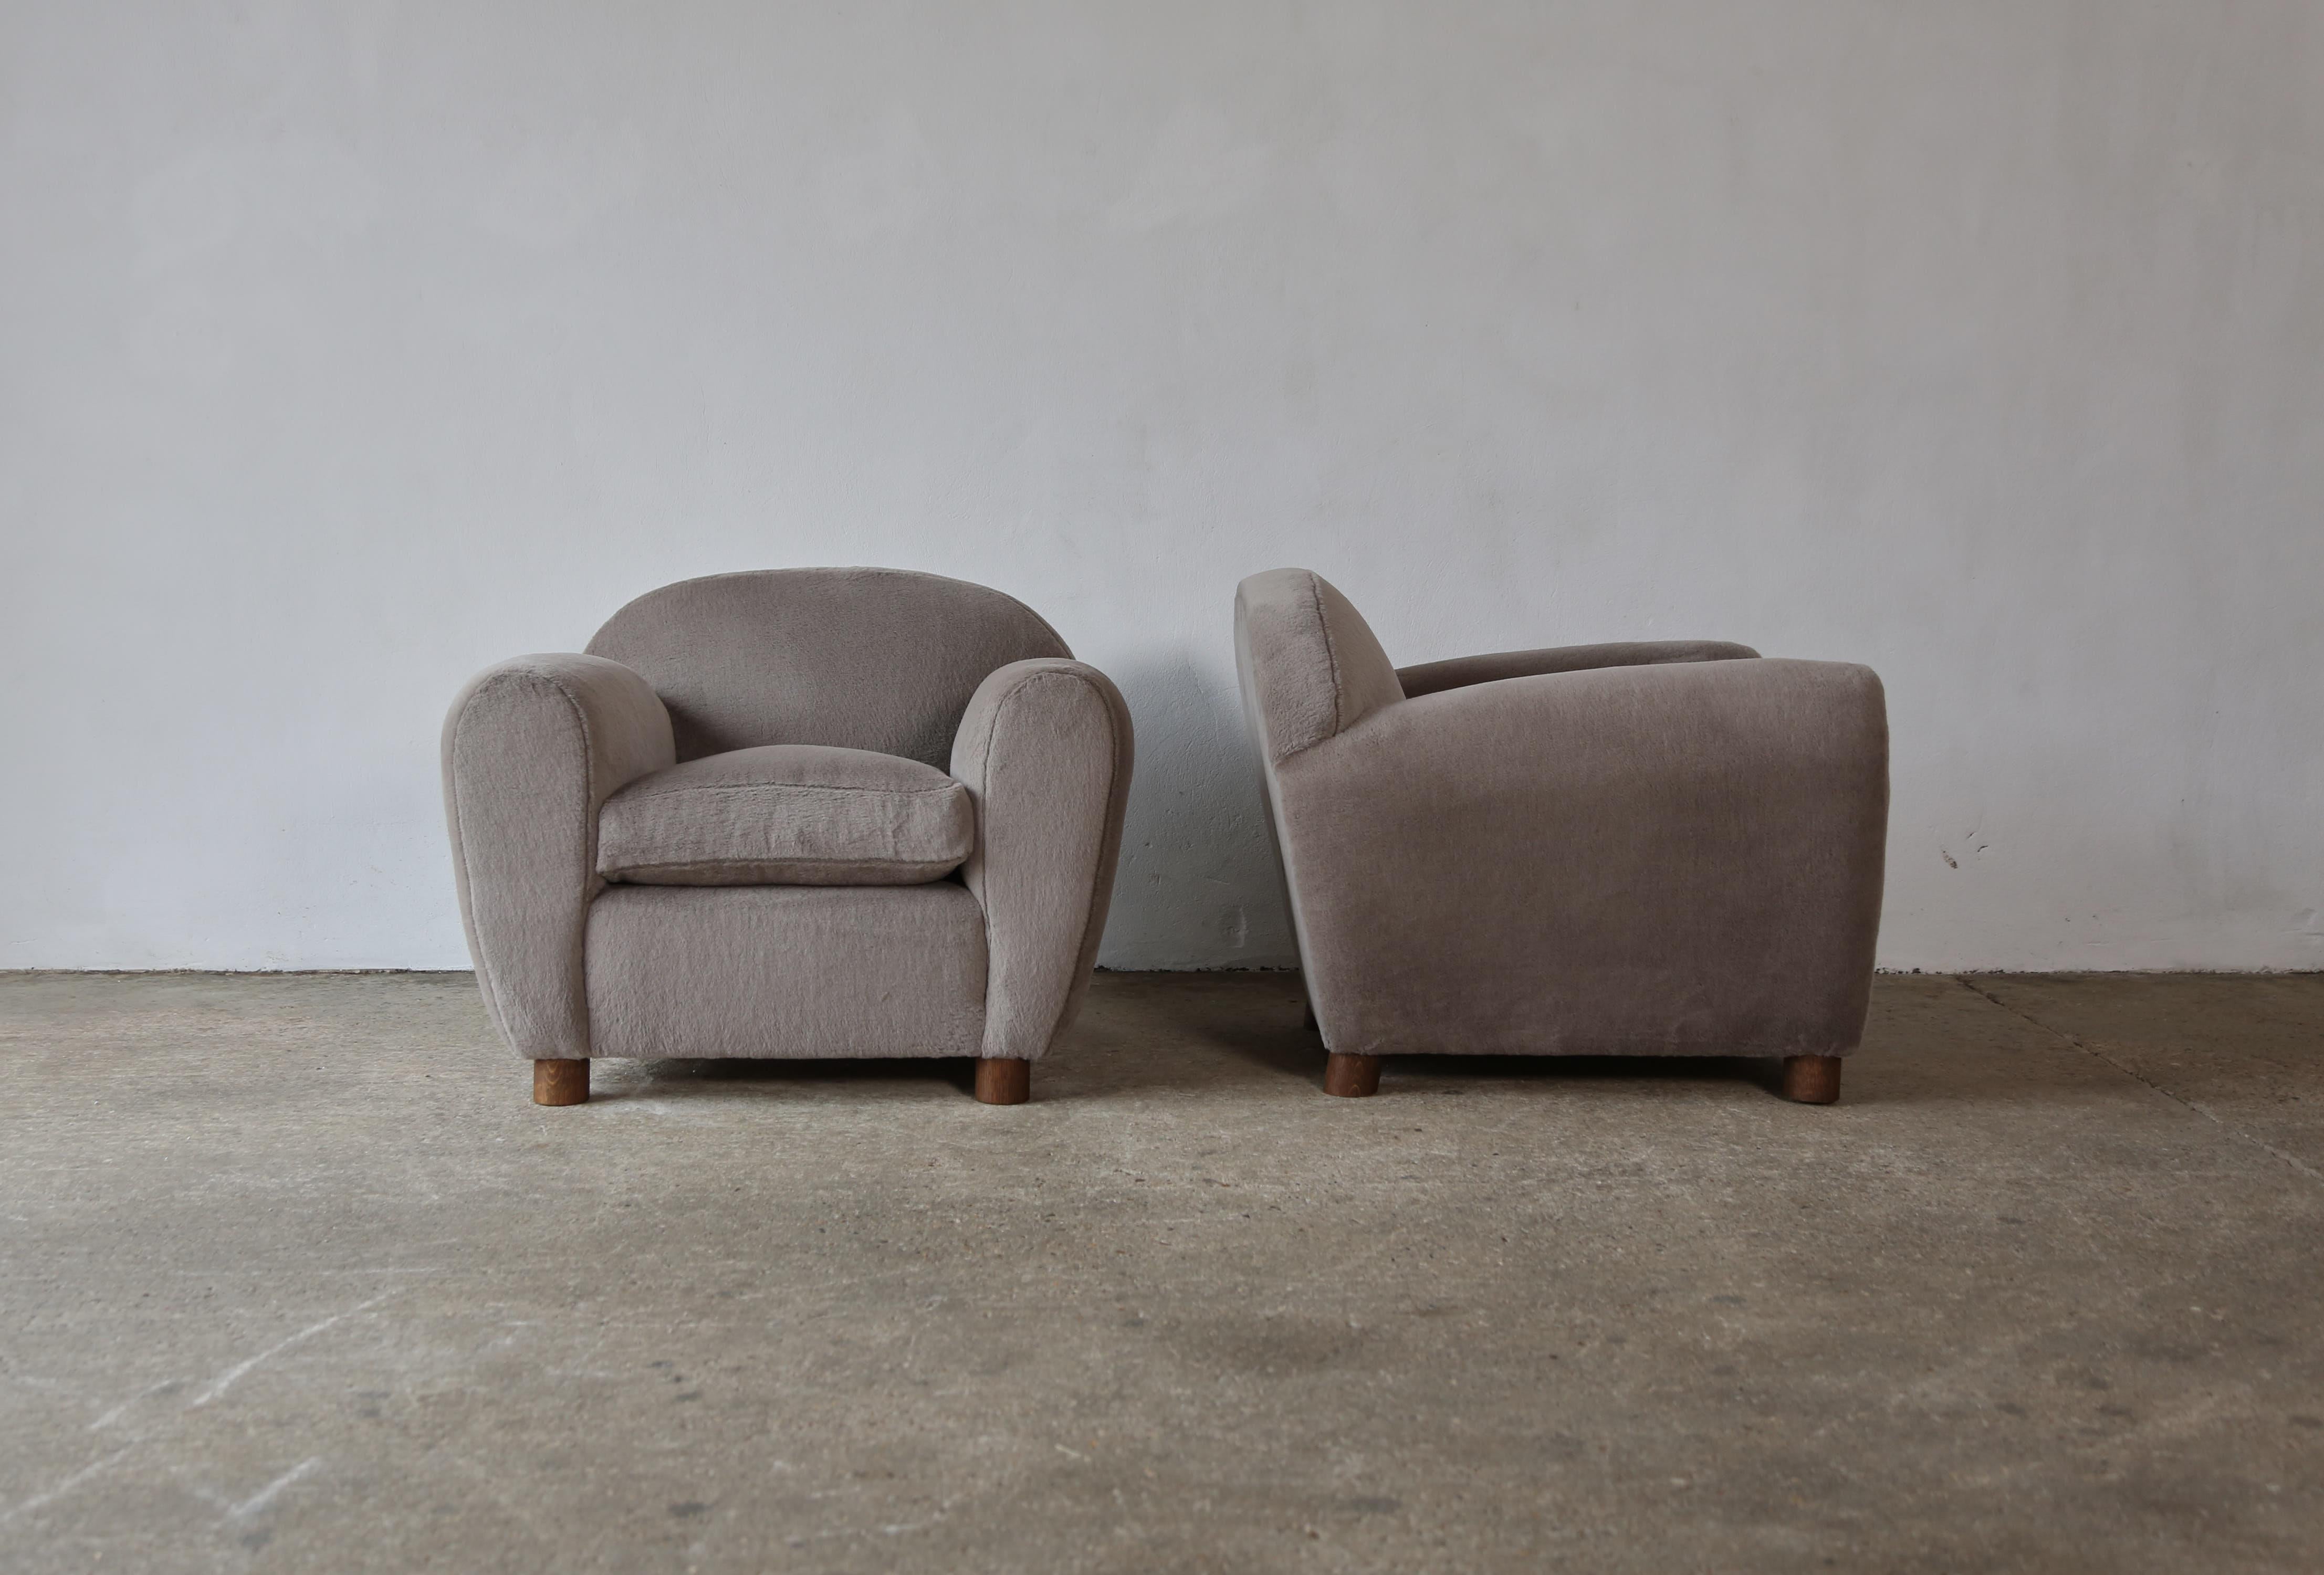 A super pair of Italian 1950s club chairs / armchairs, attirbuted to Guglielmo Ulrich. Newly upholstered in a premium 100% alpaca wool fabric. Fast shipping worldwide.
 

